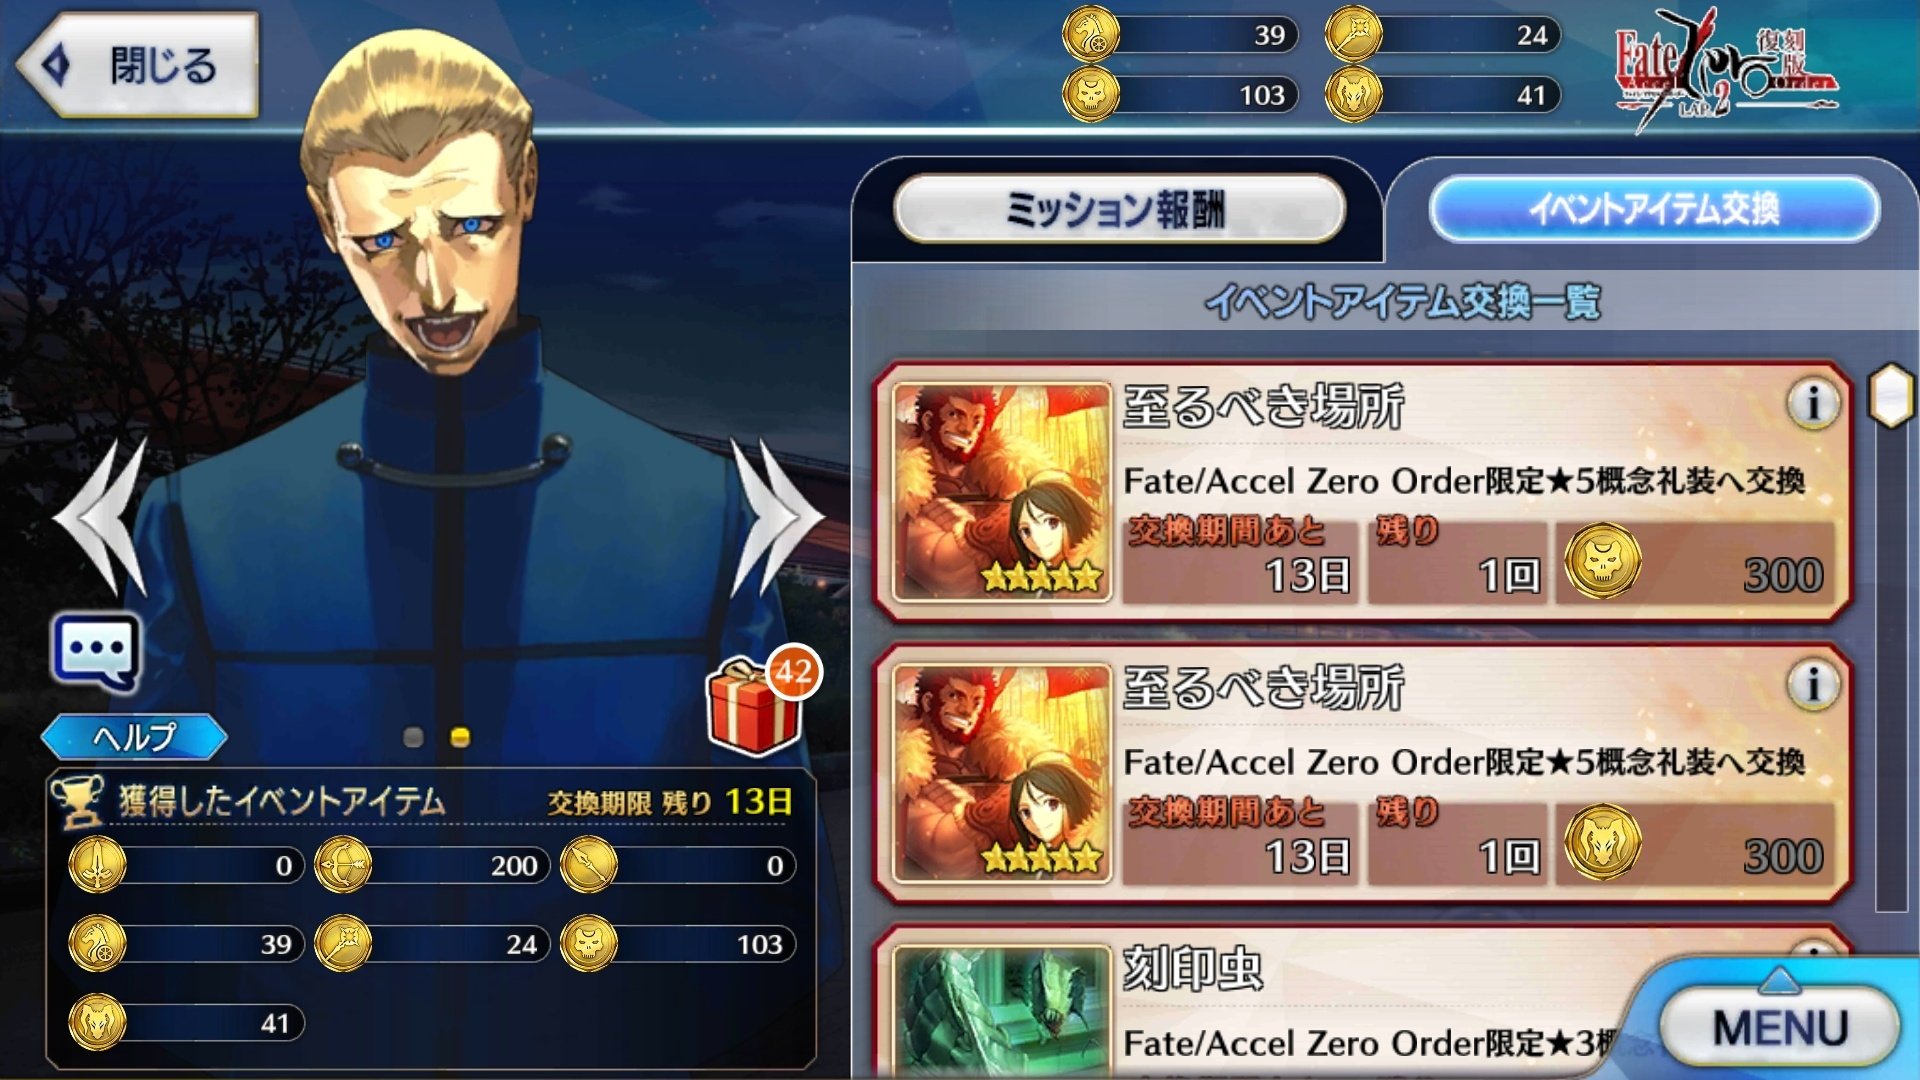 Shirou Emiya S Dad The Year Is Fate Azo Lap 2 Comes To Na But The Player Will Never Understand The Meaning To Kayneth S Jolliness Because Fategousa Still Hasn T Implemented Shop